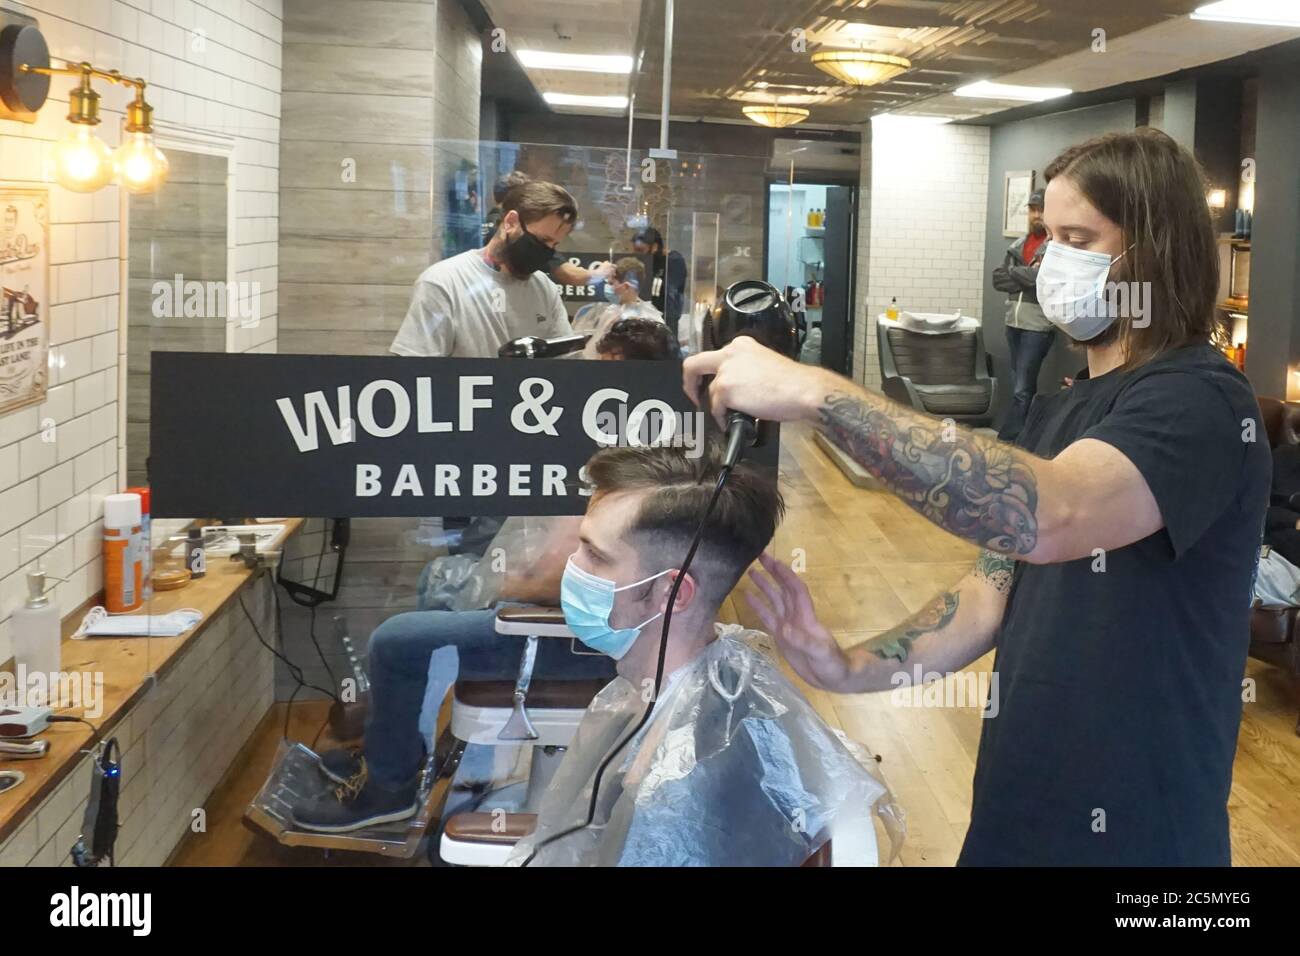 Barbers Re Opening High Resolution Stock Photography and Images - Alamy